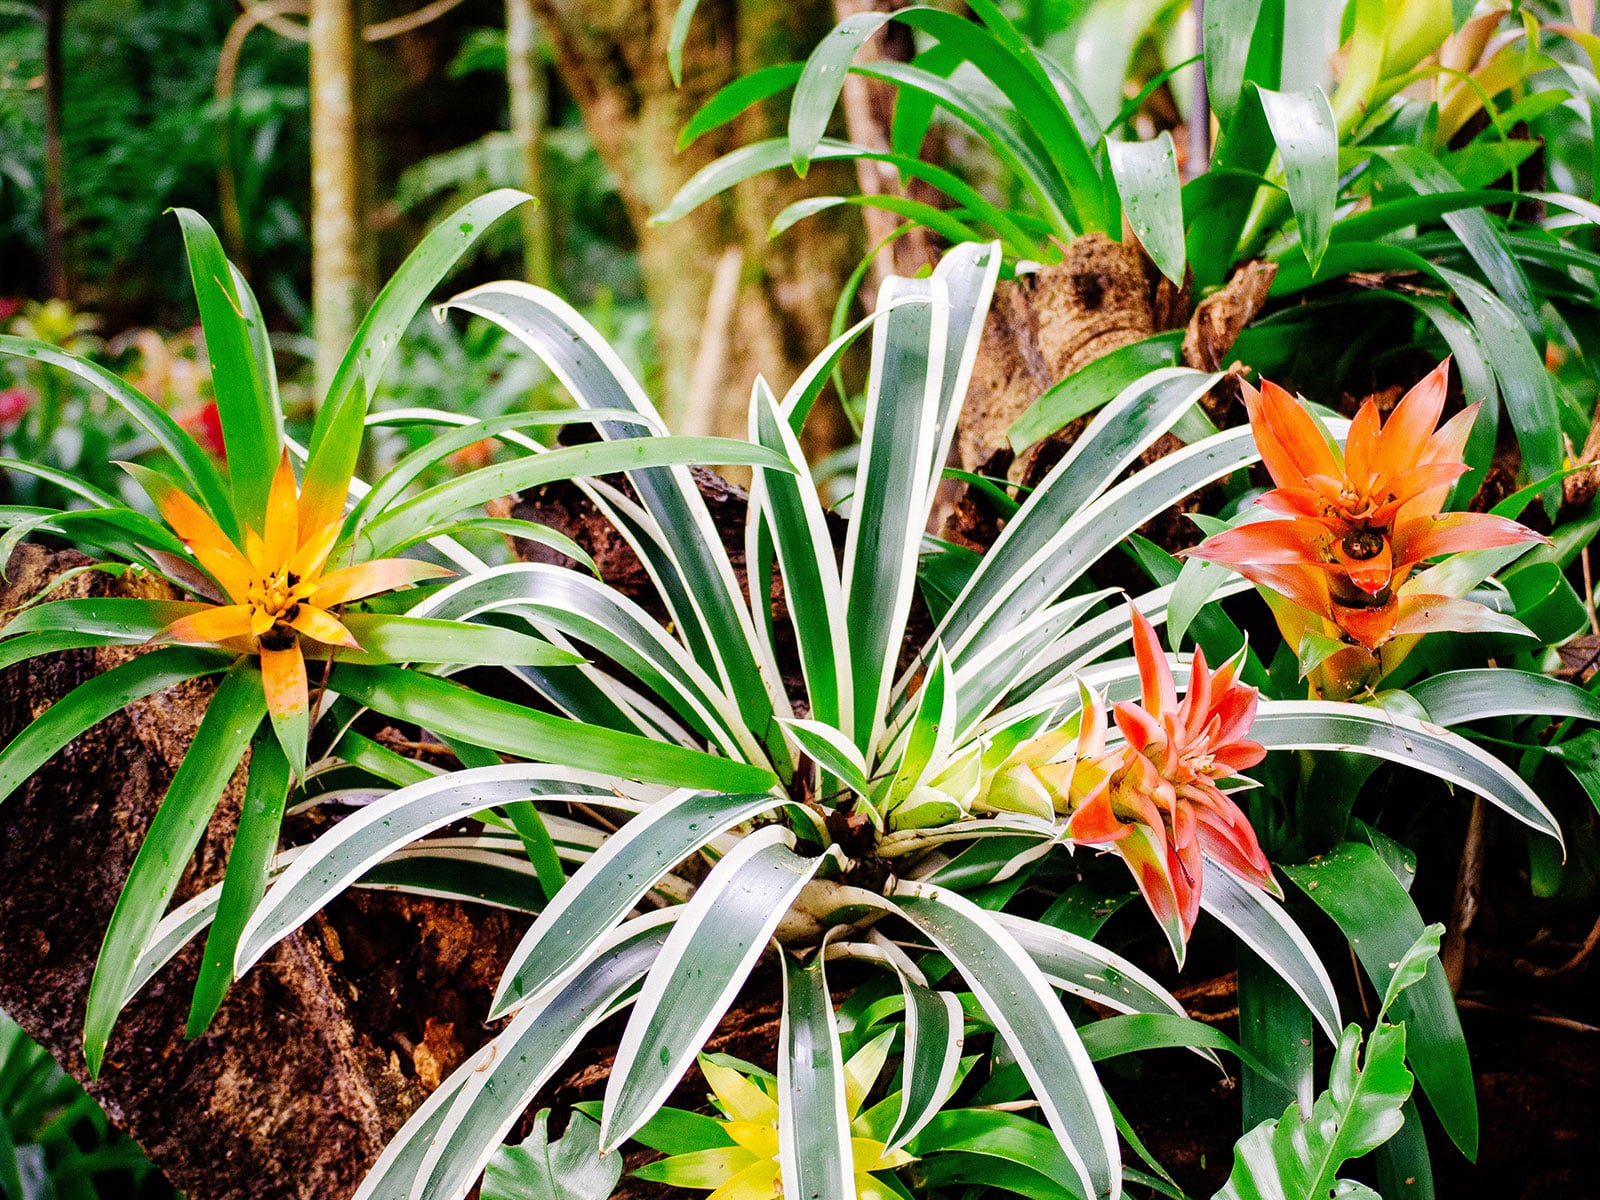 A group of different Guzmania bromeliad plants with orange and yellow blooms, including green and variegated cultivars, planted on a log